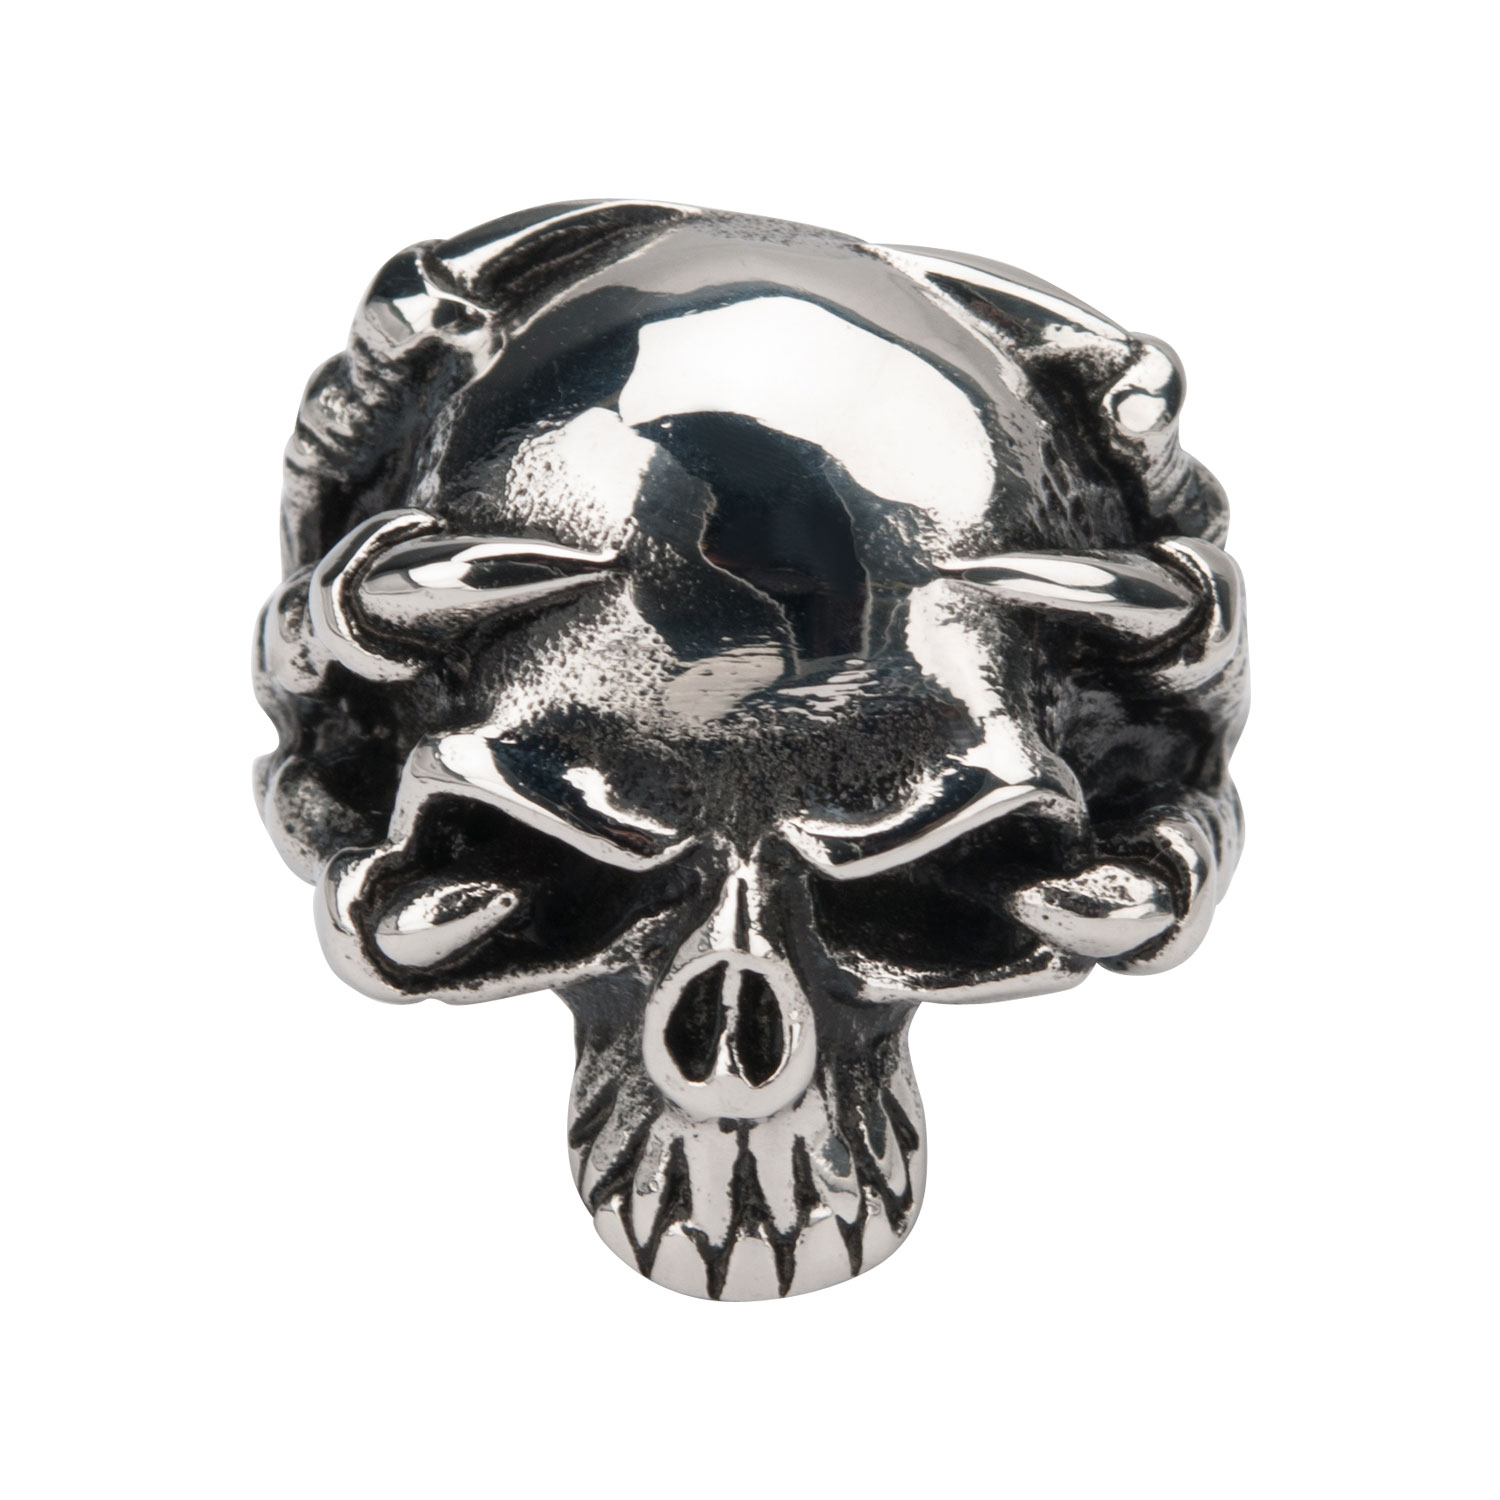 Black Oxidized Skull Ring with Claws Image 2 Selman's Jewelers-Gemologist McComb, MS